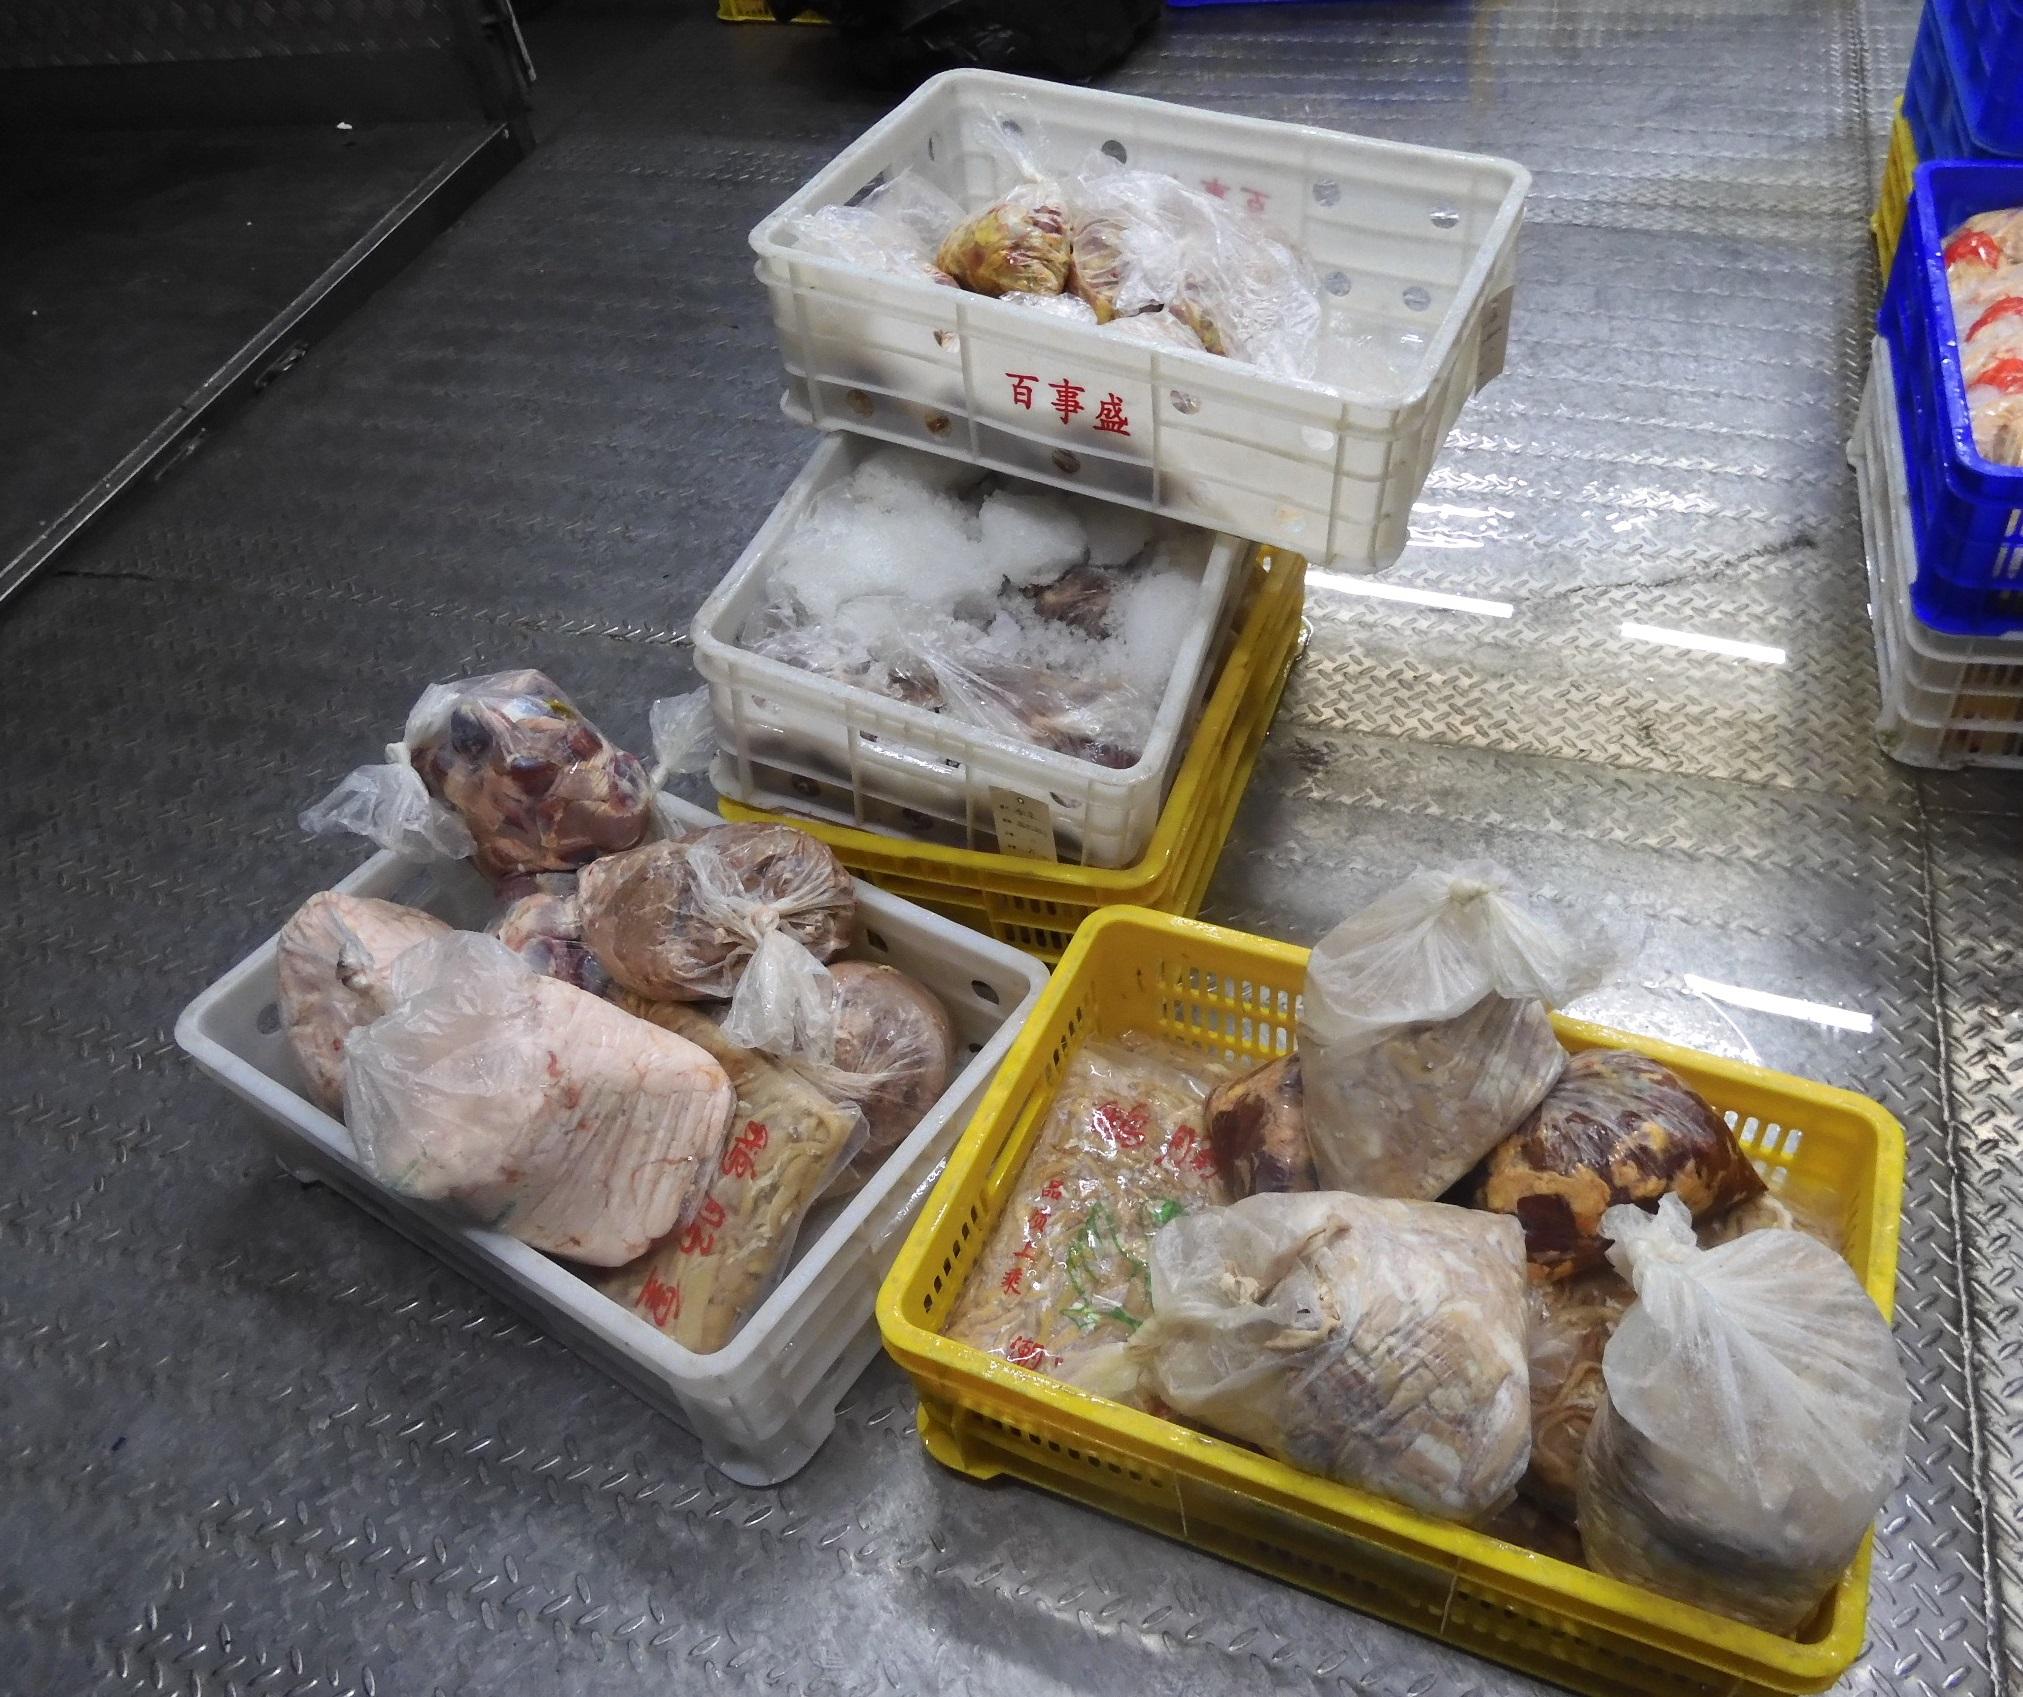 The Food and Environmental Hygiene Department today (December 23) raided an unlicensed cold store at Tai Shu Ha Road West, Yuen Long. Photo shows chilled poultry offal found during the operation.